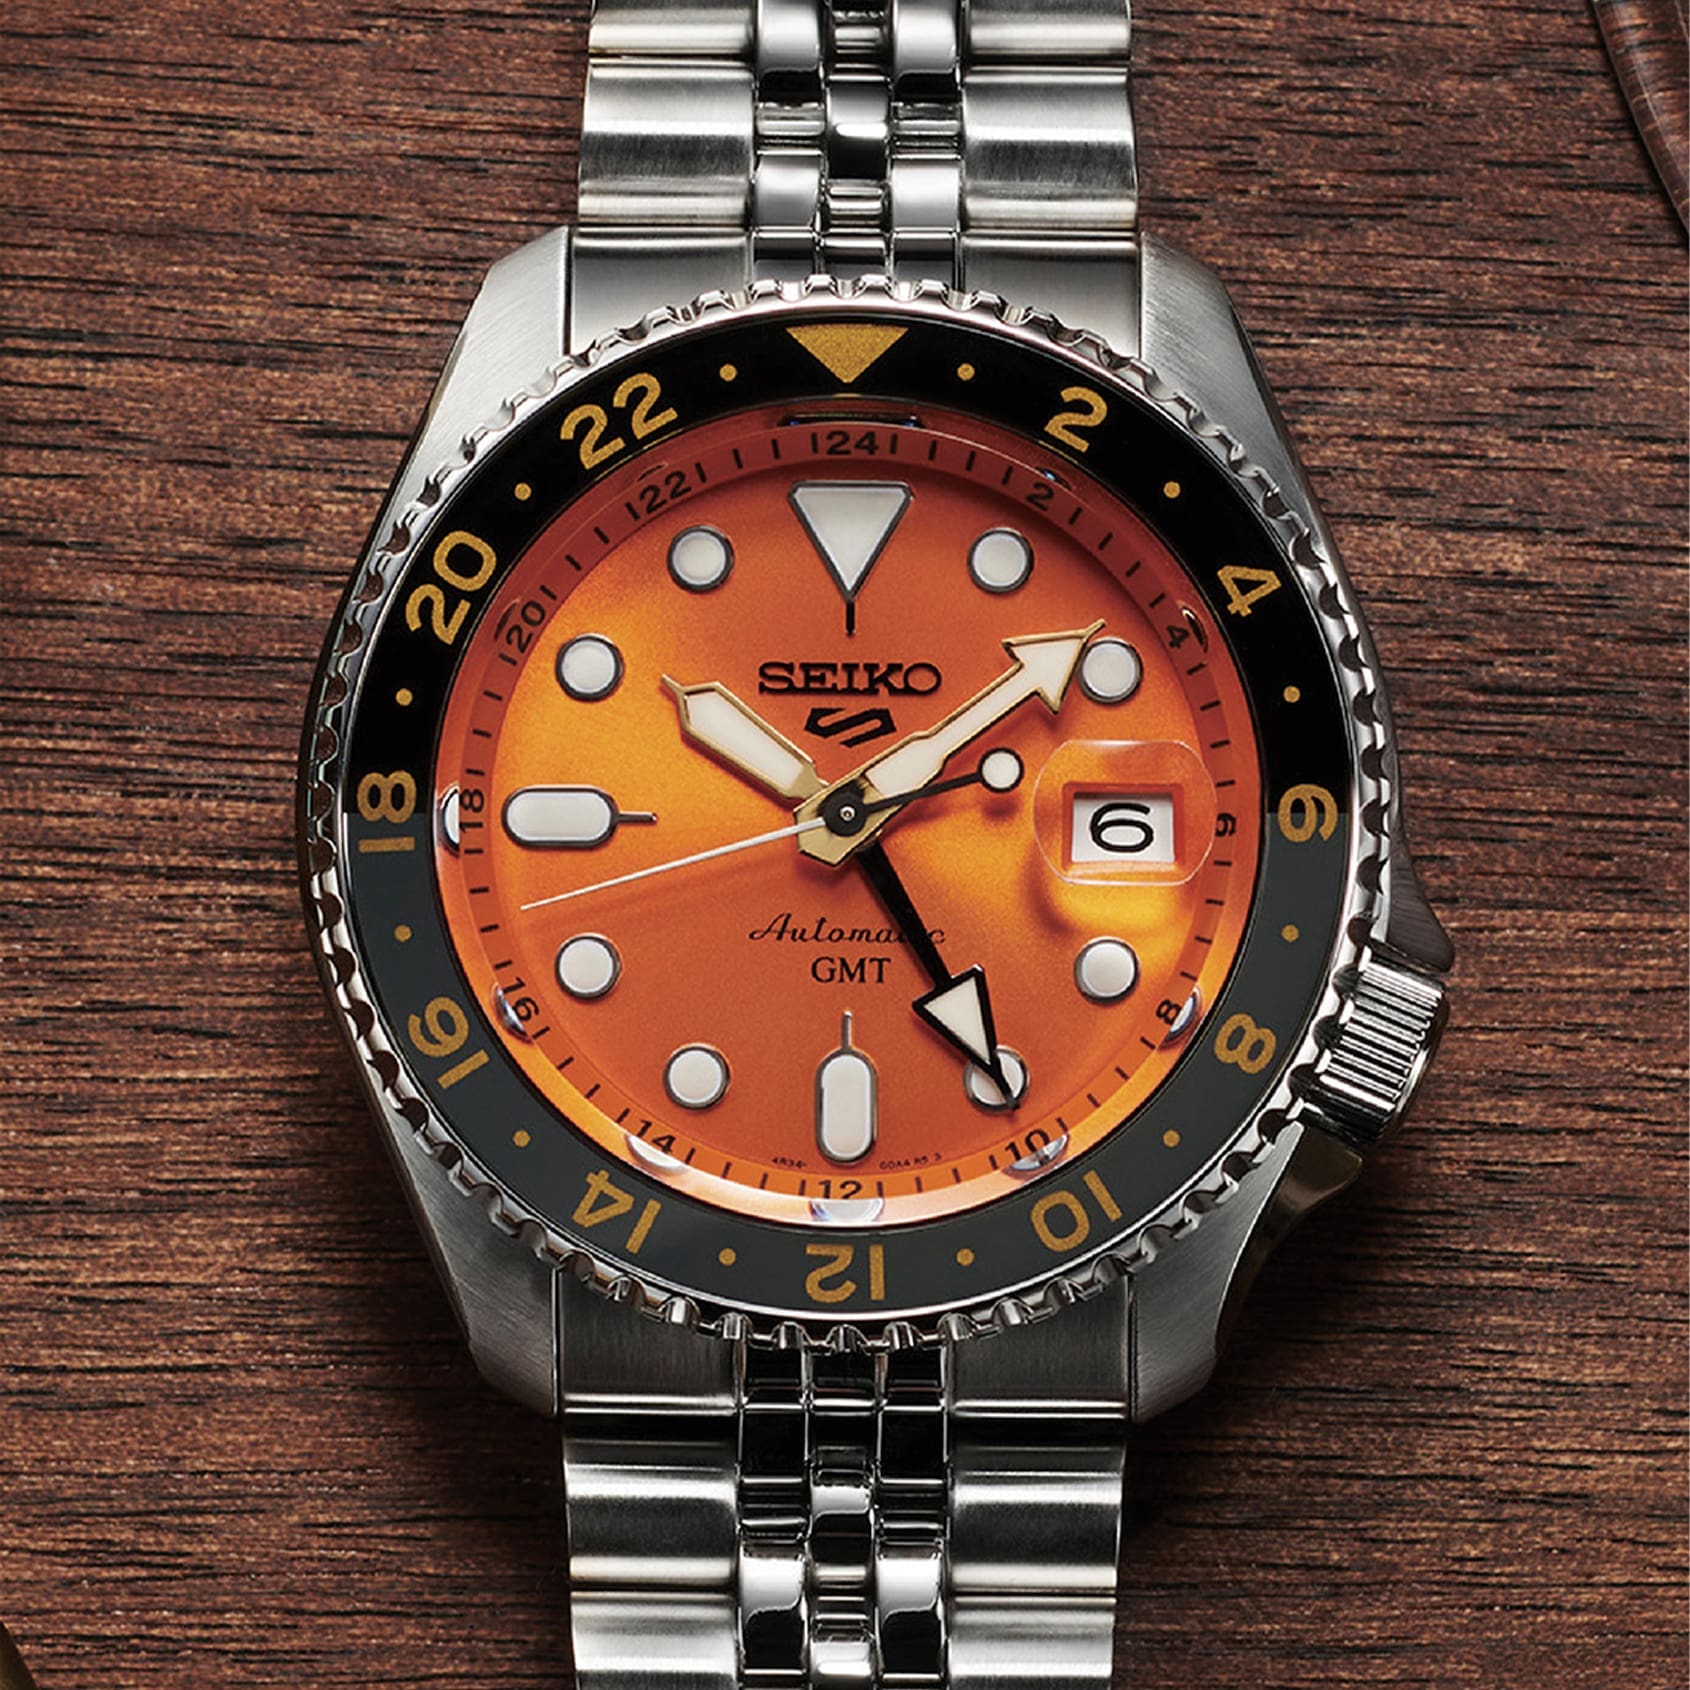 IN-DEPTH: Gone but not forgotten – the discontinued Rolex Submariner ref. 114060